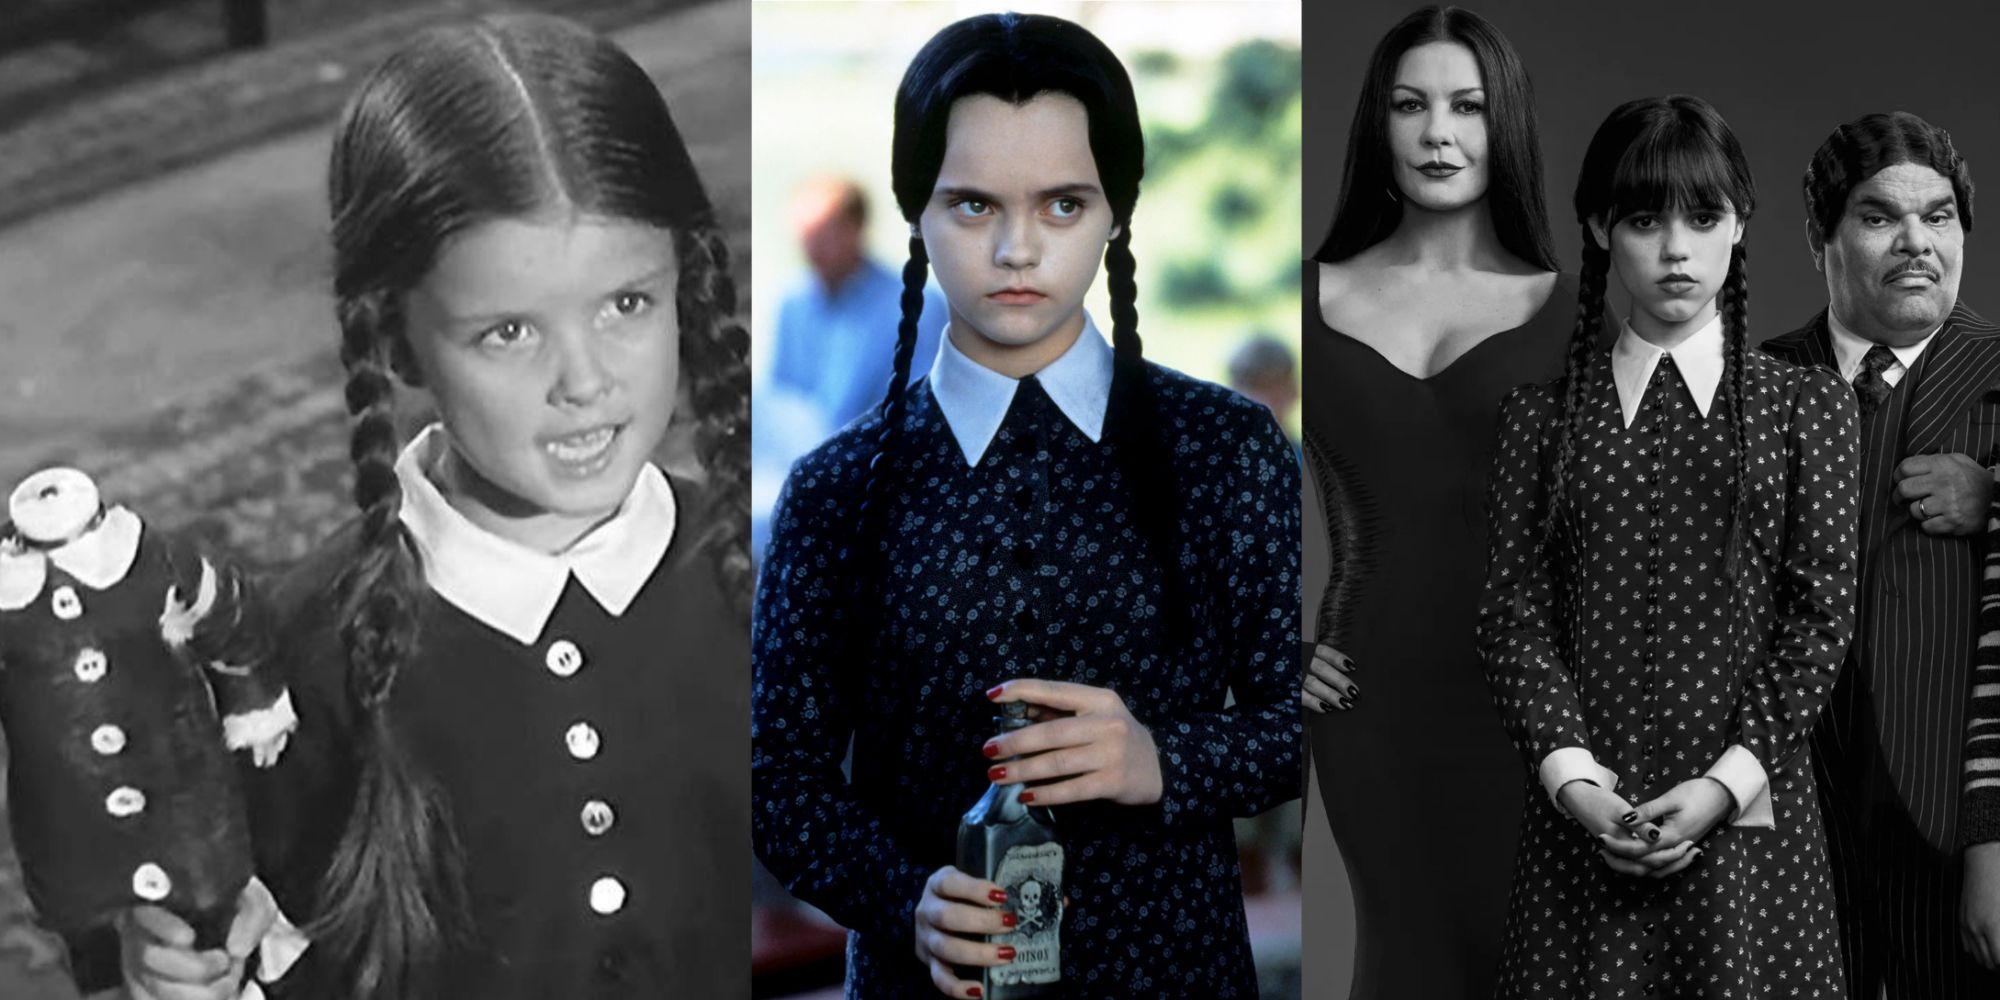 You might be surprised how Thing was made for 'The Addams Family